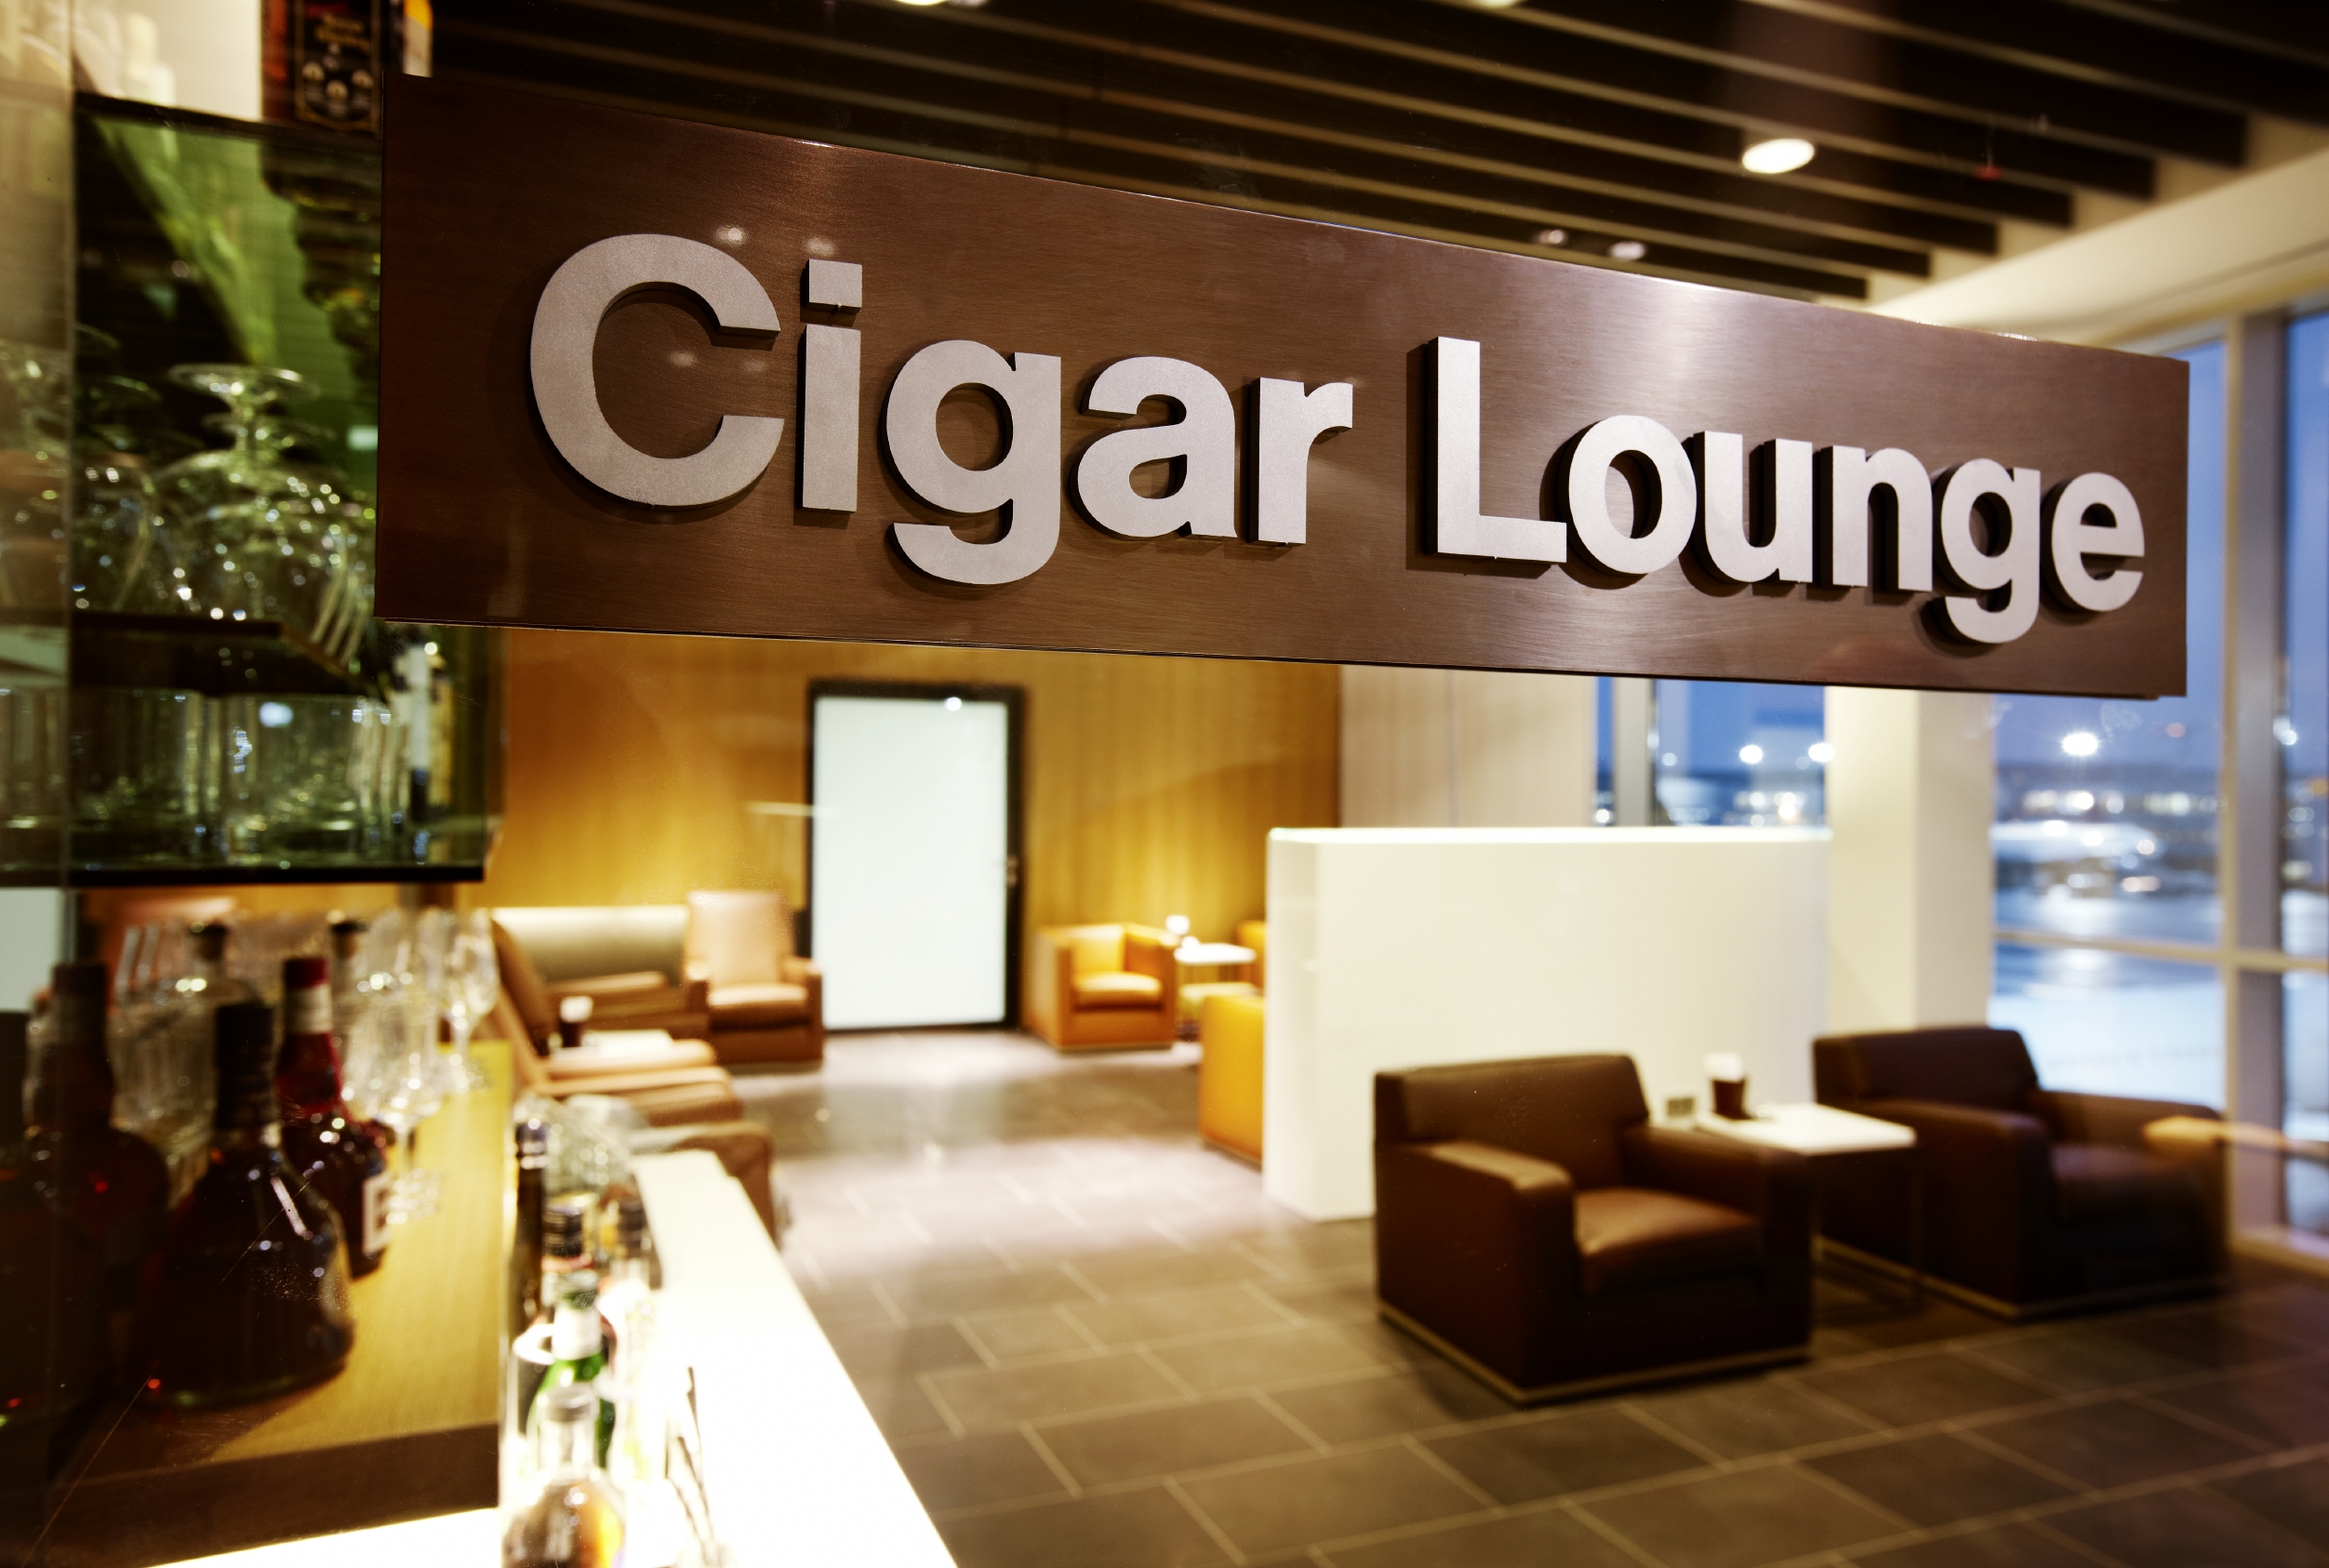 Cigar Lounge in Lufthansa First Class Area